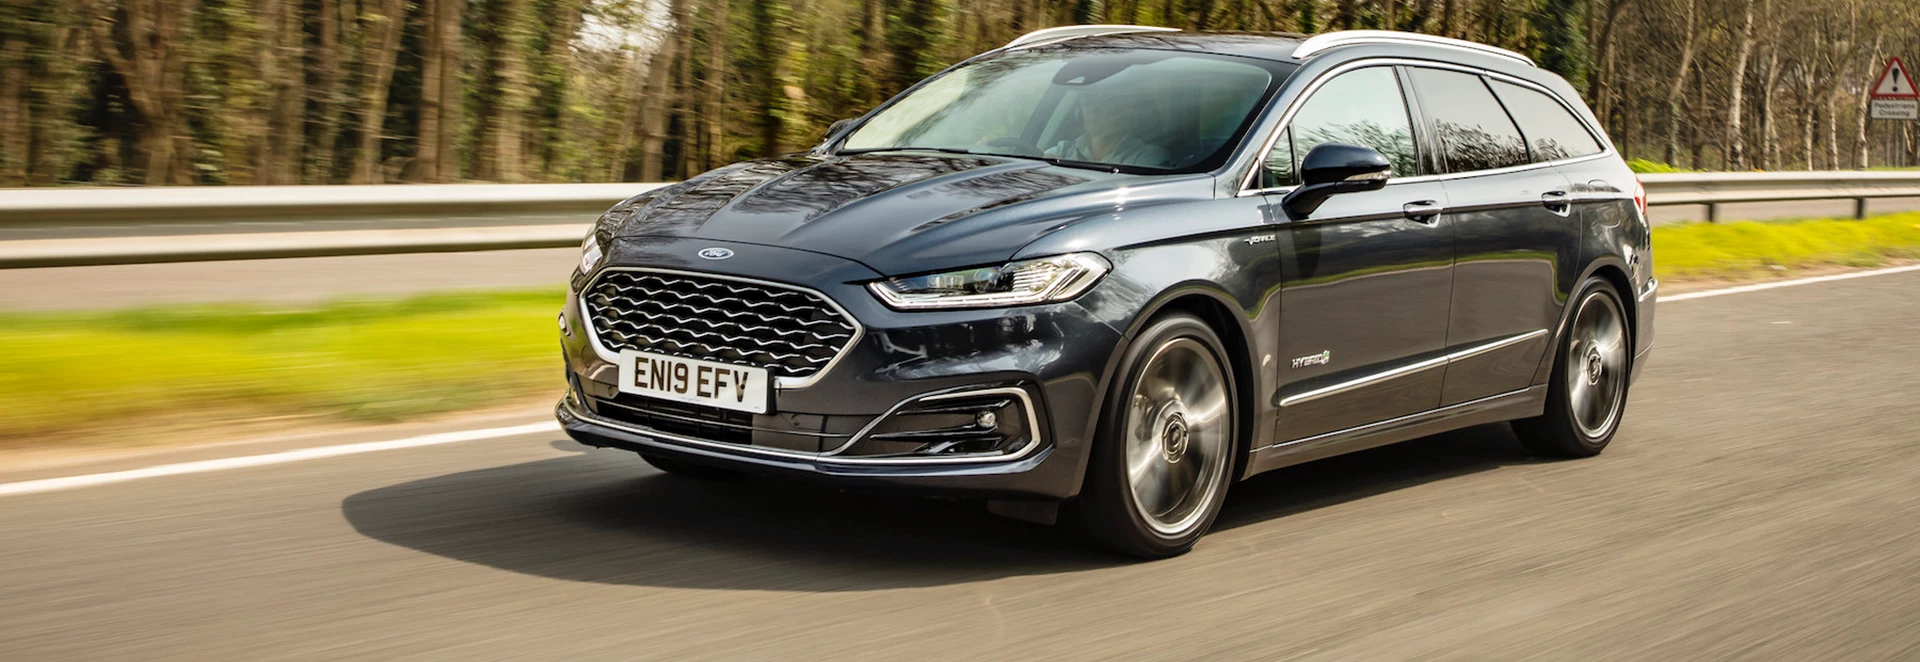 Ford Mondeo to be phased out as brand switches focus to electrified models 